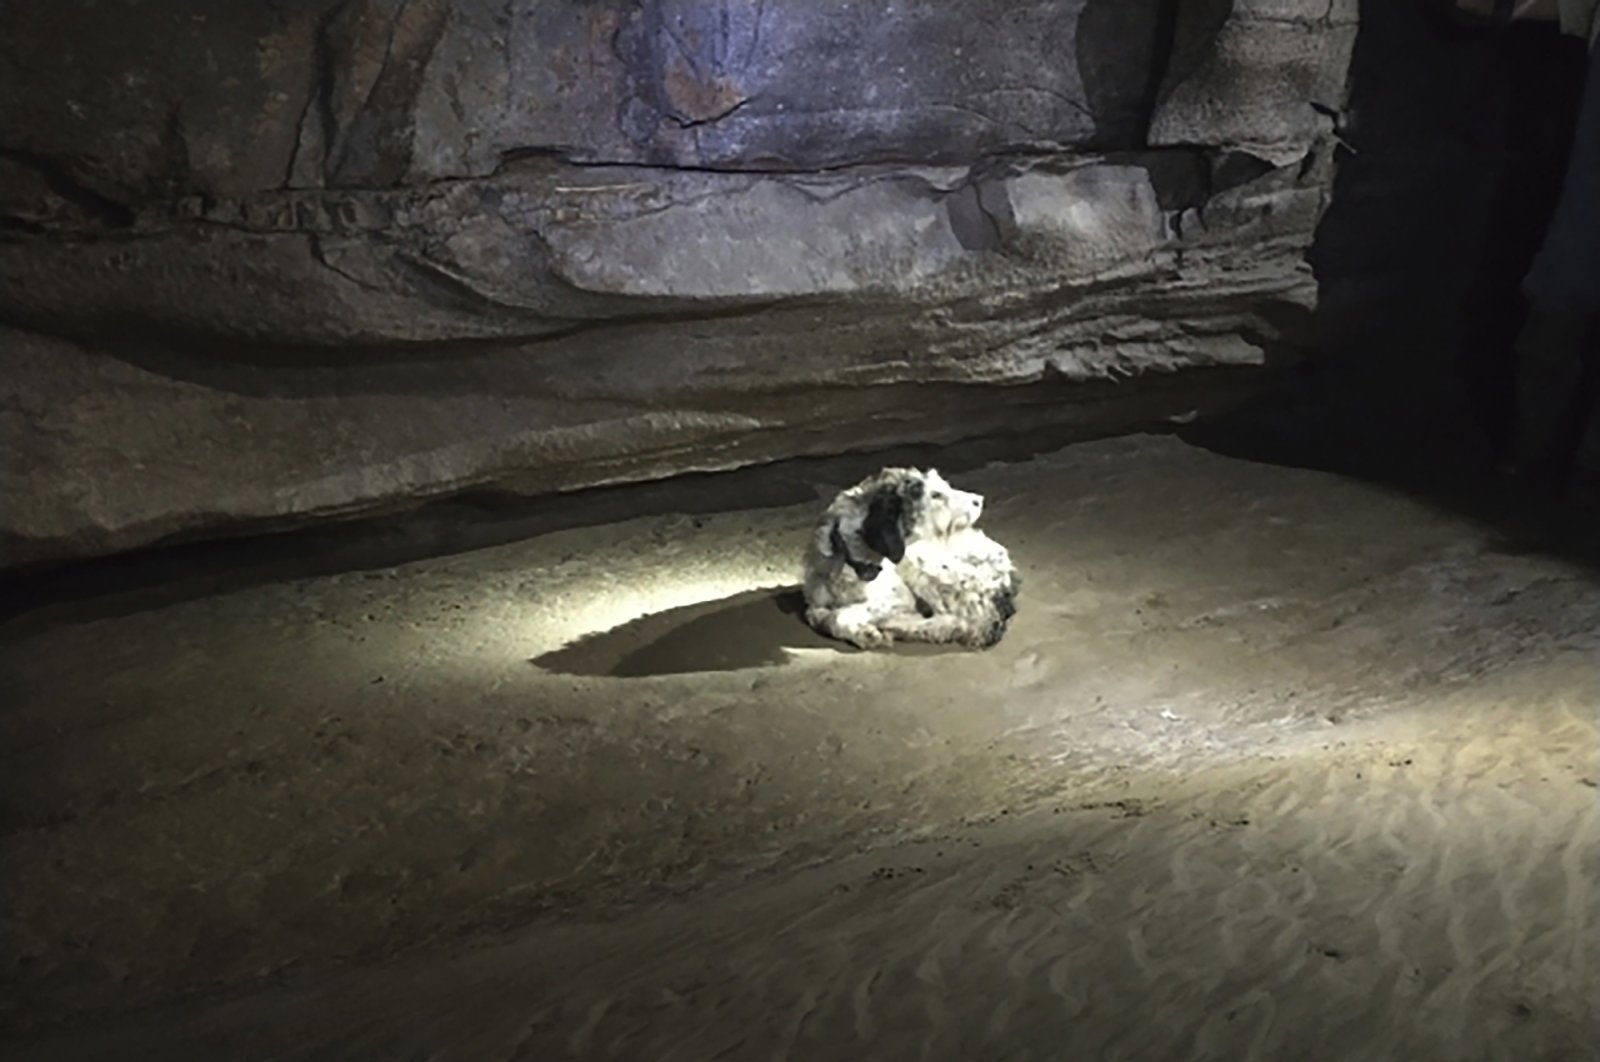 This photo provided by Gerry Keene shows a 13-year-old dog named Abby that was found by cavers on Aug. 6, 2022, at a cave in Perryville, Missouri. The dog’s owner said she had been gone for nearly two months. She is regaining weight and healing. (Gerry Keene via AP Photo)